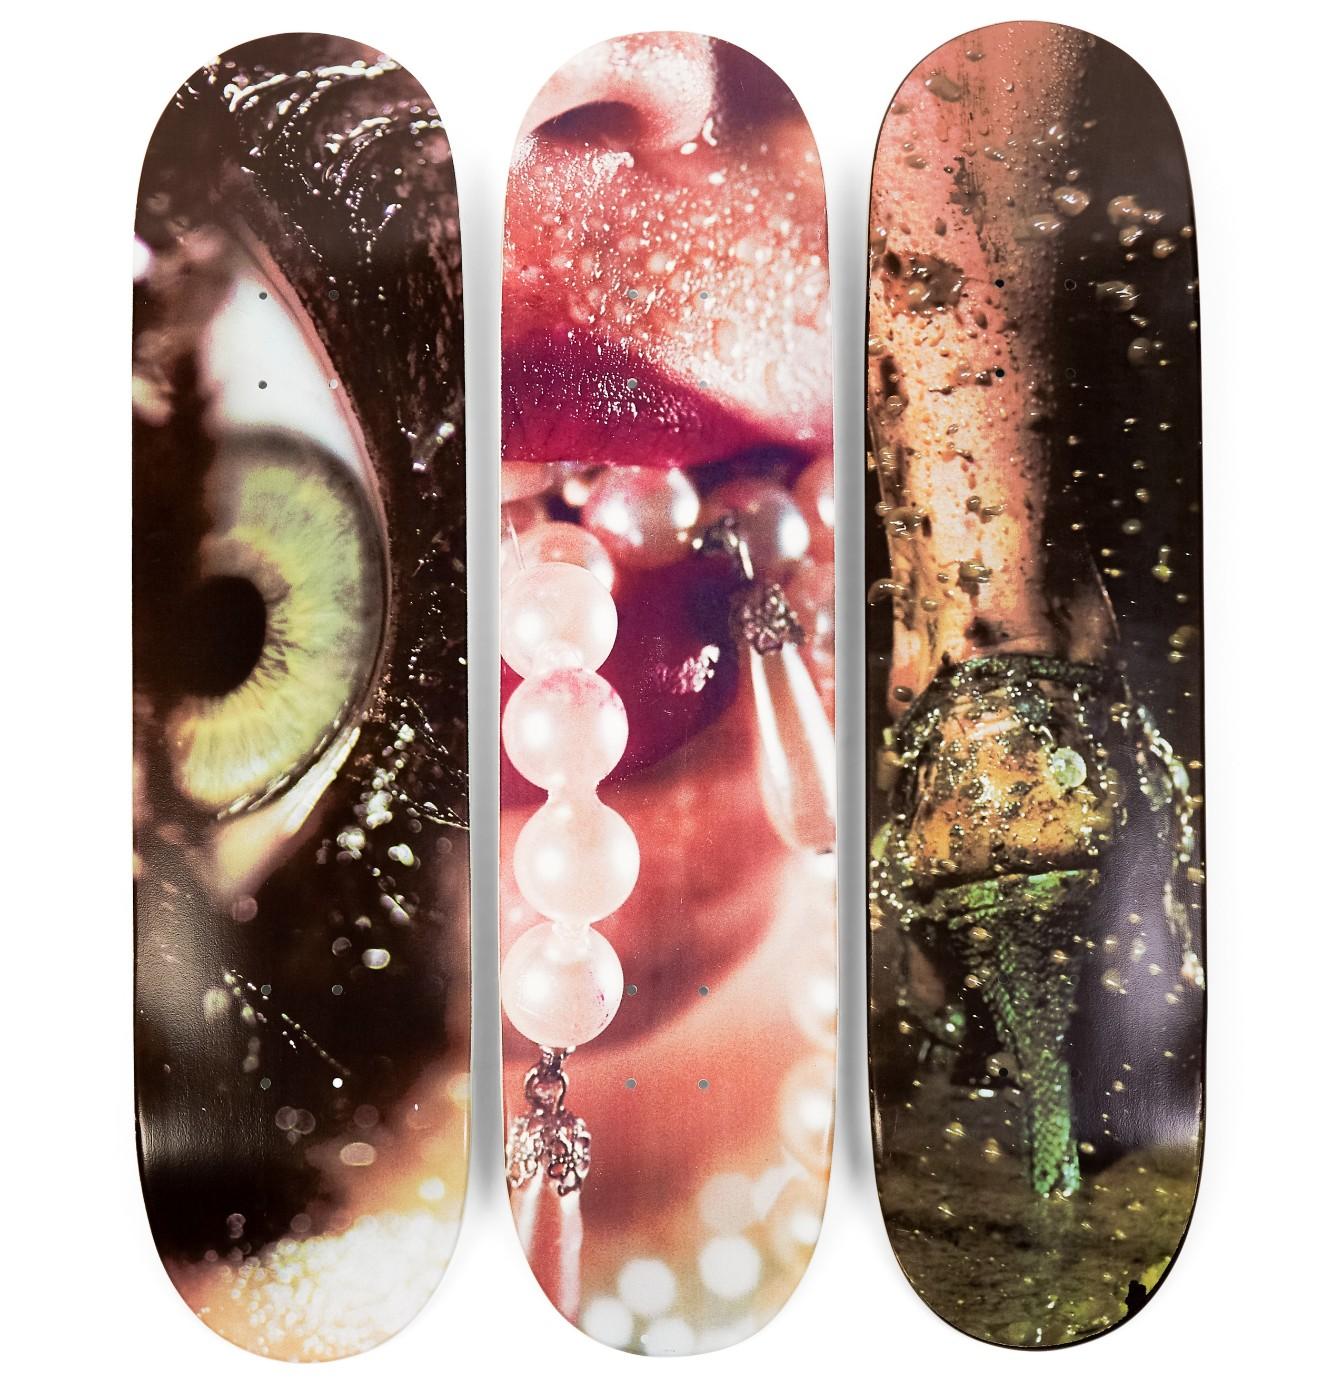 Sotheby's to Auction Complete Archive of Supreme Skate Decks